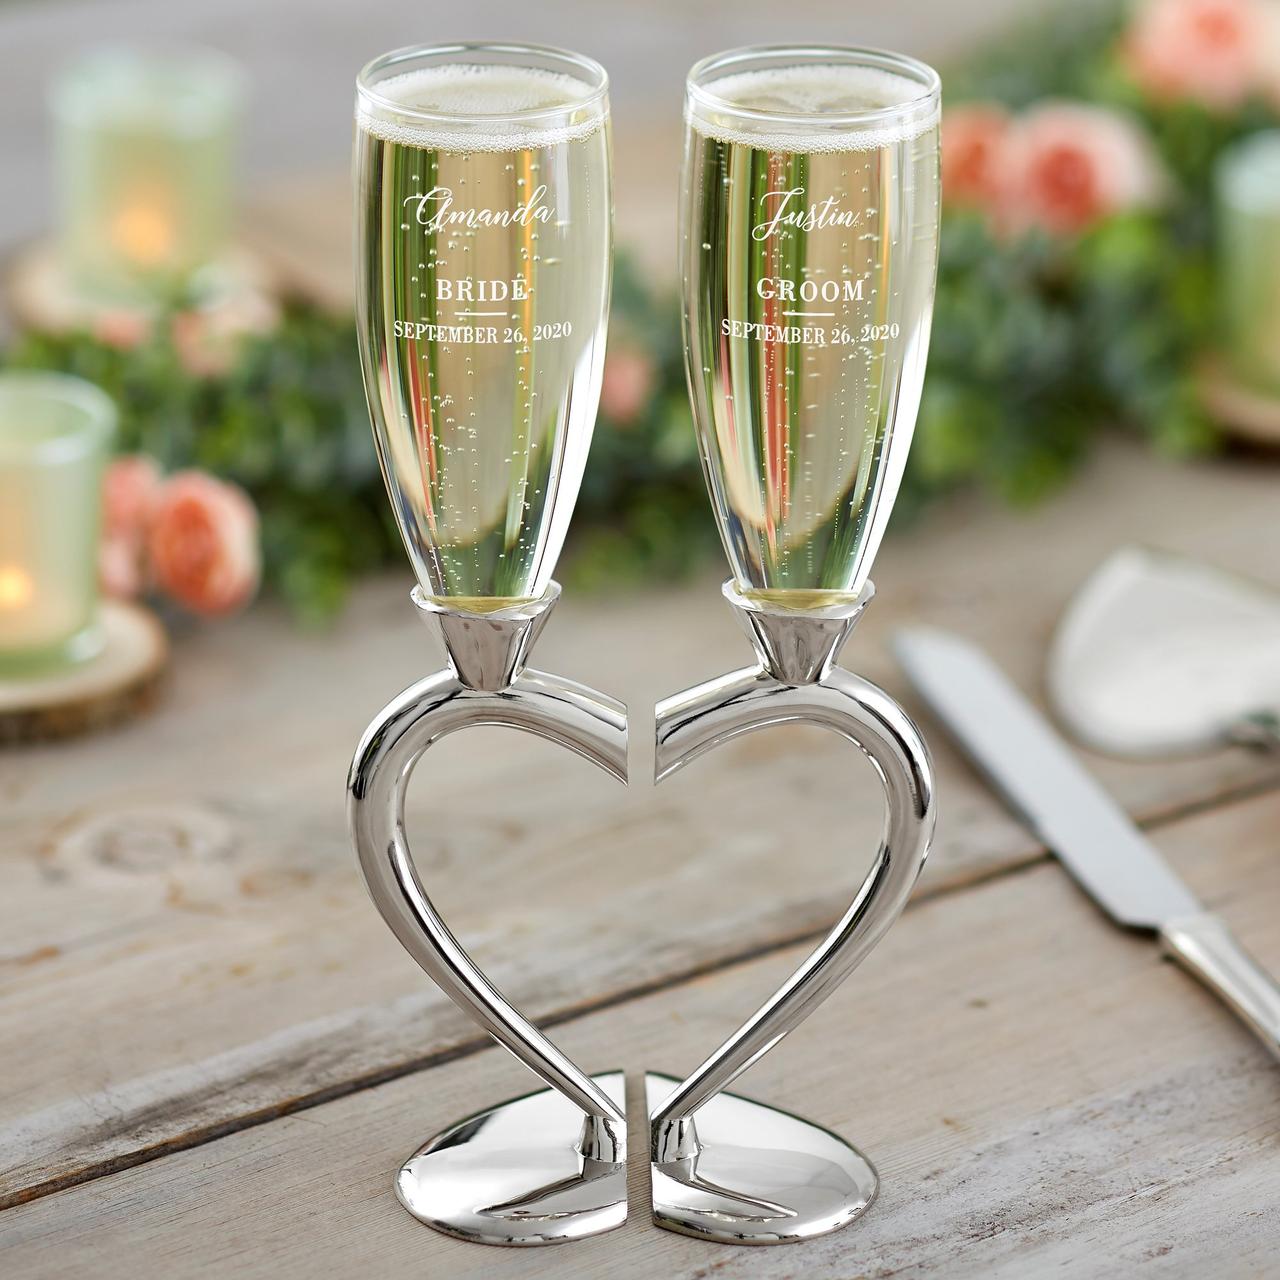 WEDDING TOASTING GLASSES SILVER HEARTS CRYSTAL STEMS GIFT BOXED CHAMPAGNE FLUTES 